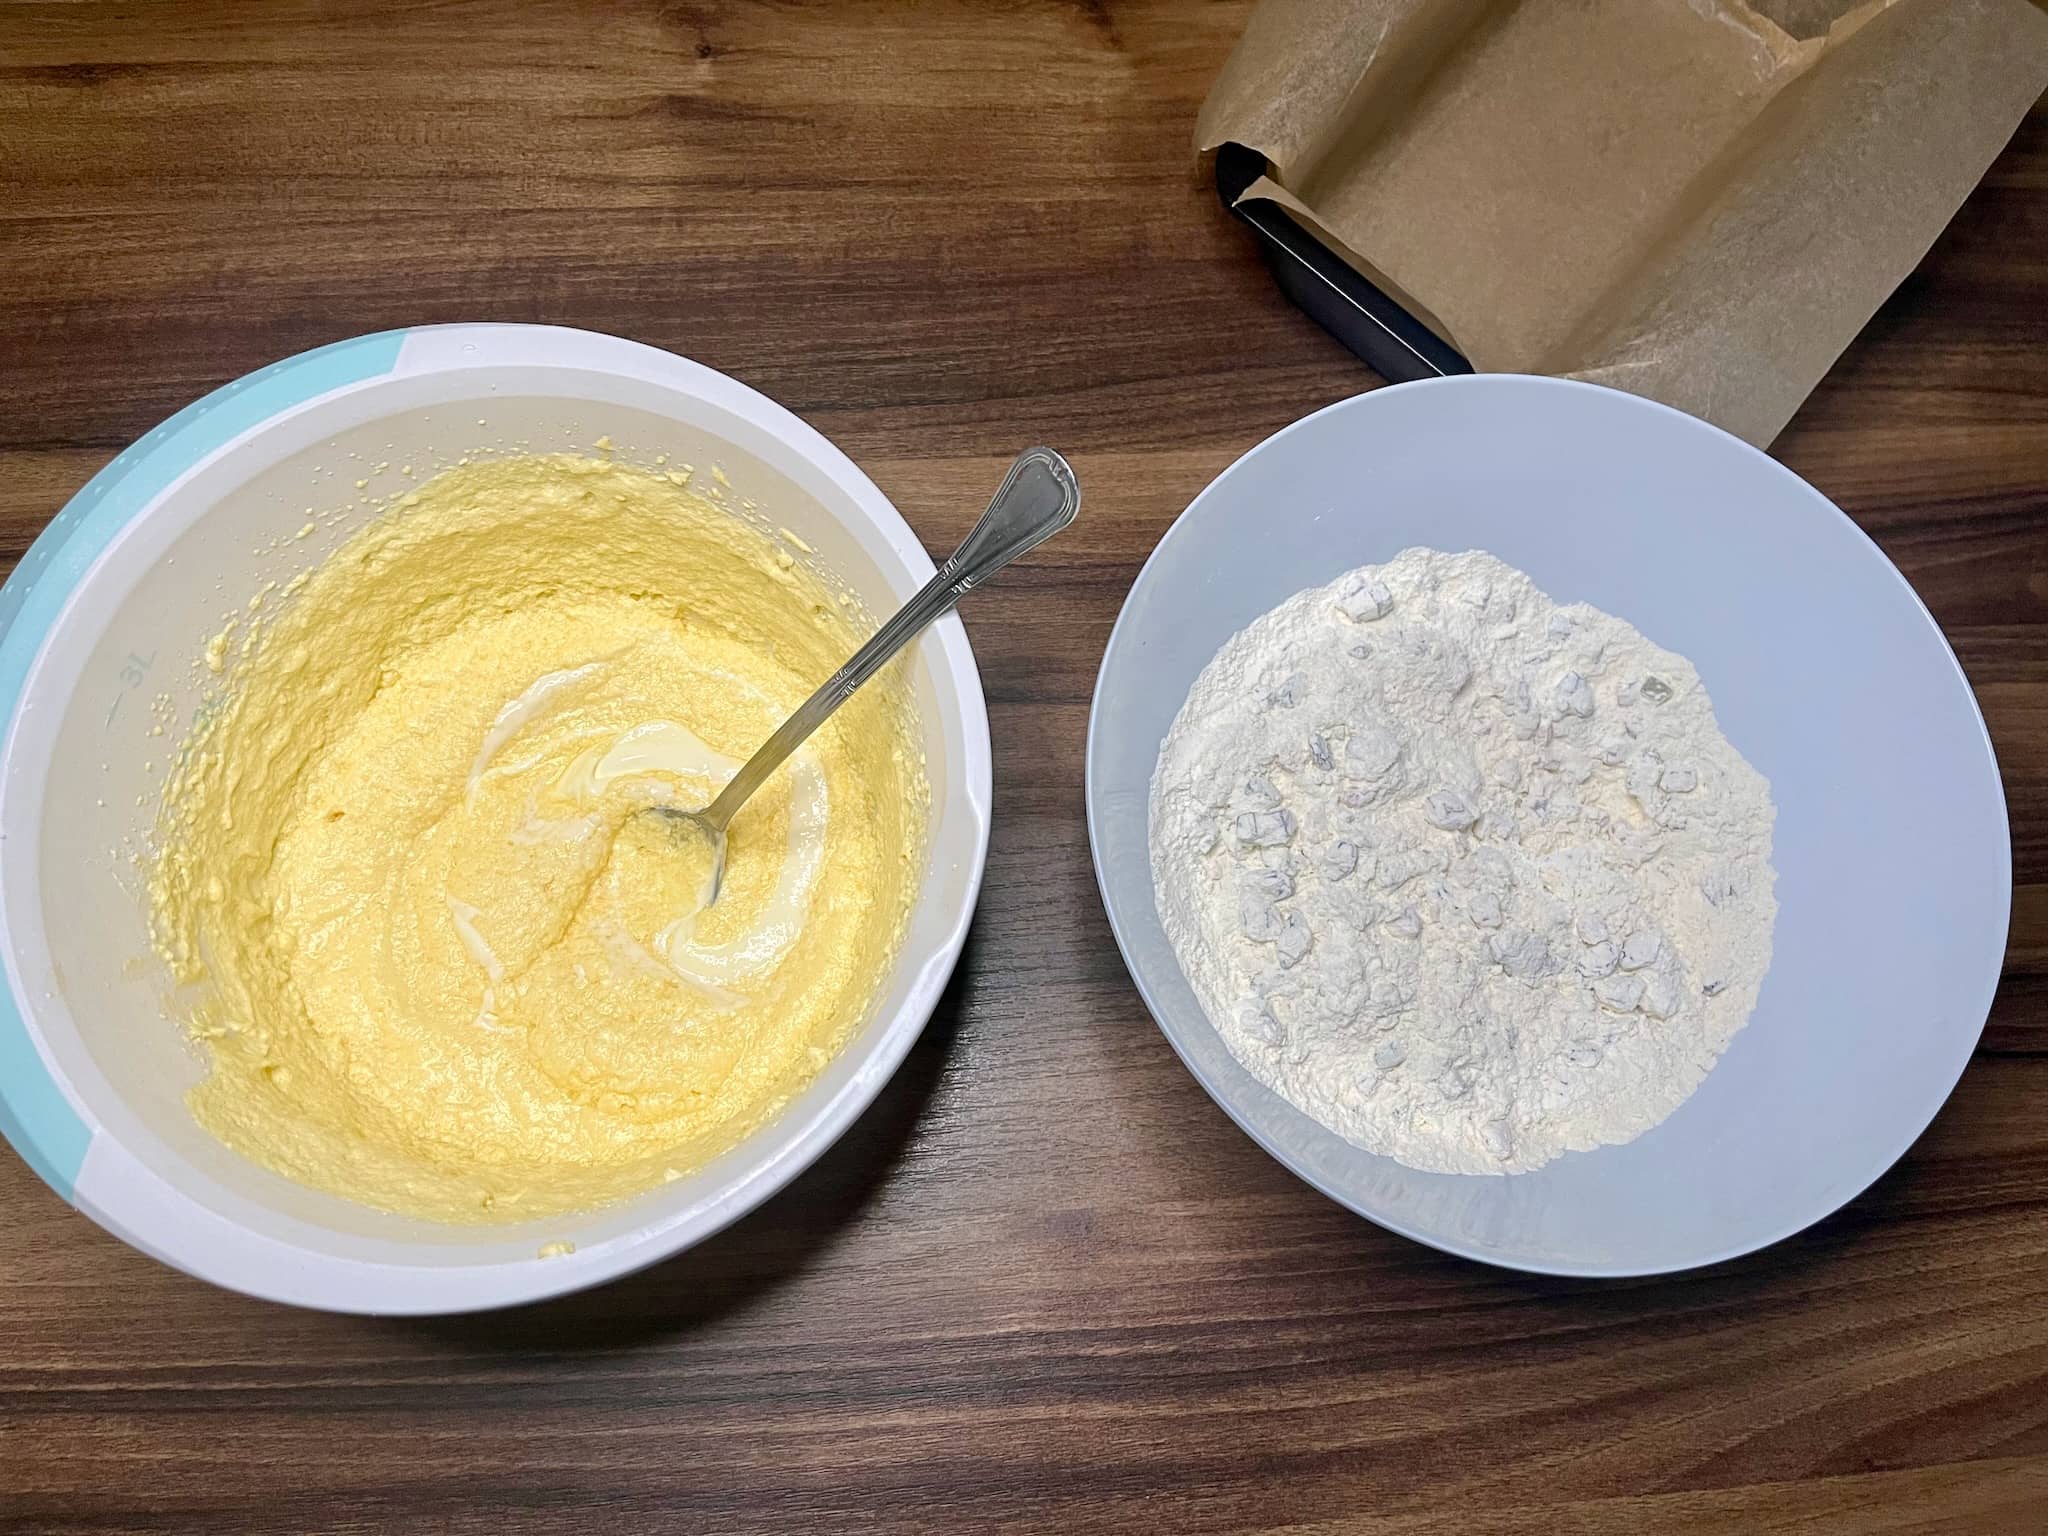 Two bowls, one with wet dough and the other with dry ingredients